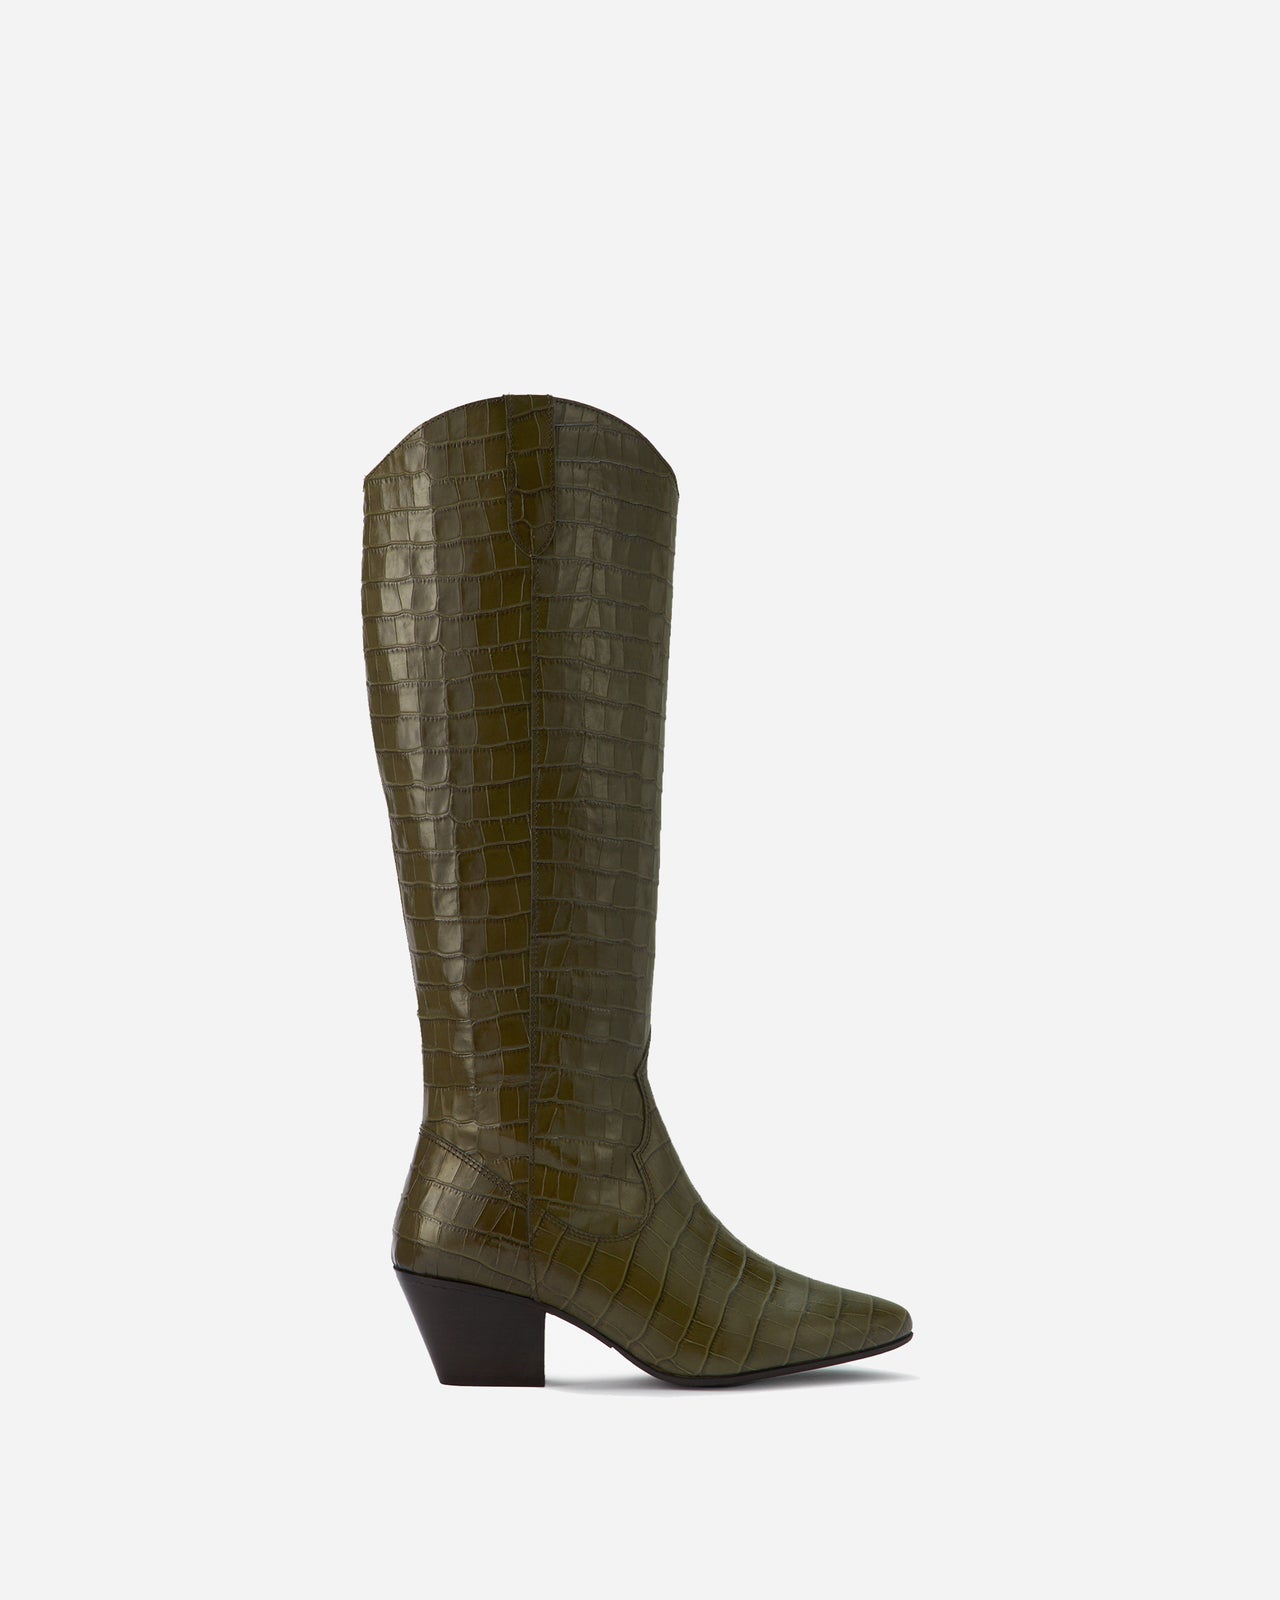 knee high leather green croc western style cowboy boots